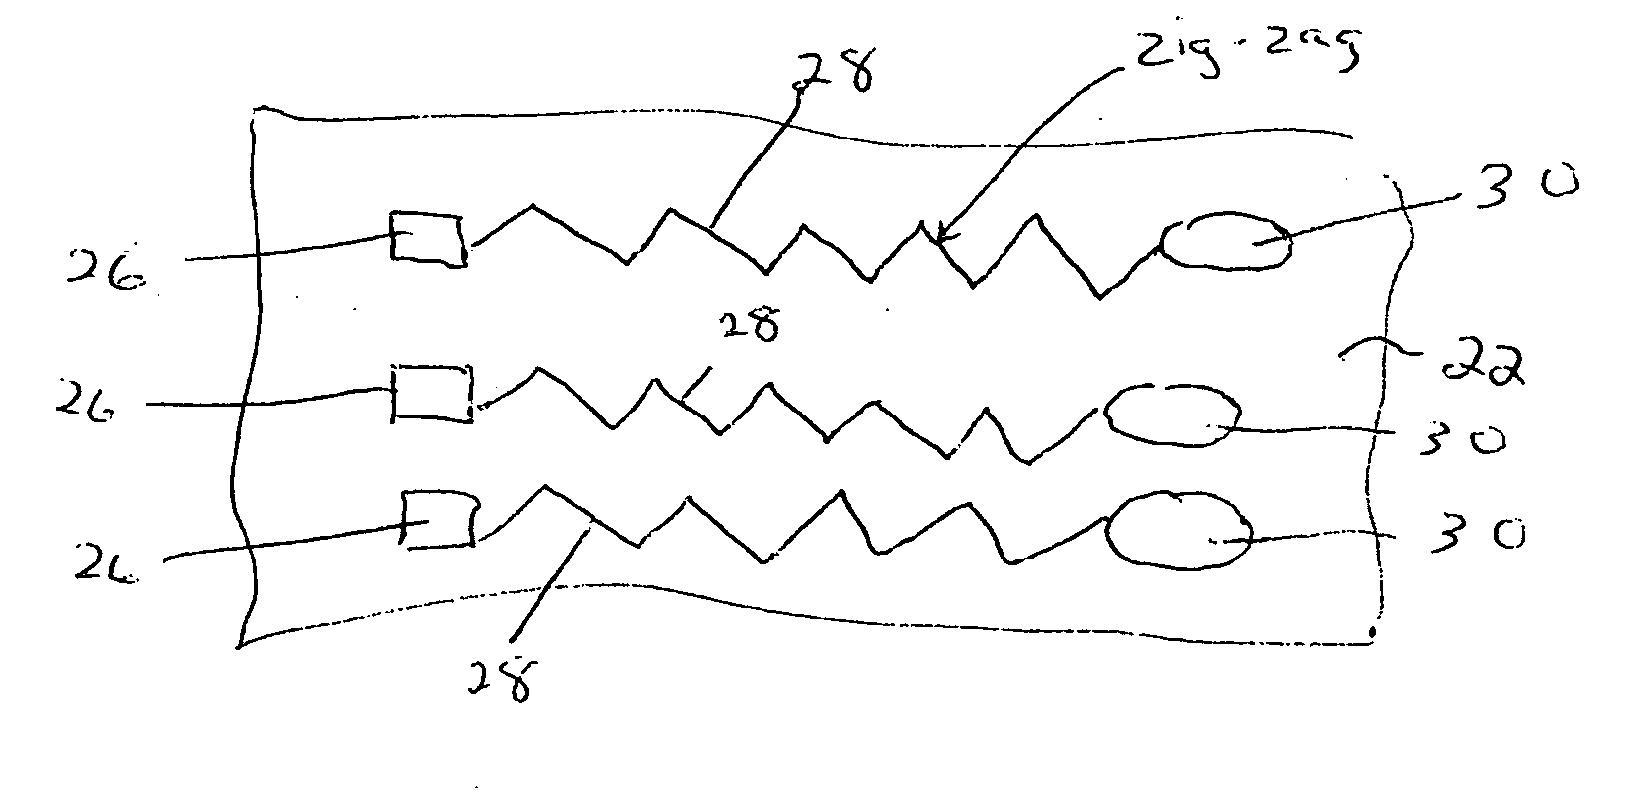 Method for producing flexible, stretchable, and implantable high-density microelectrode arrays